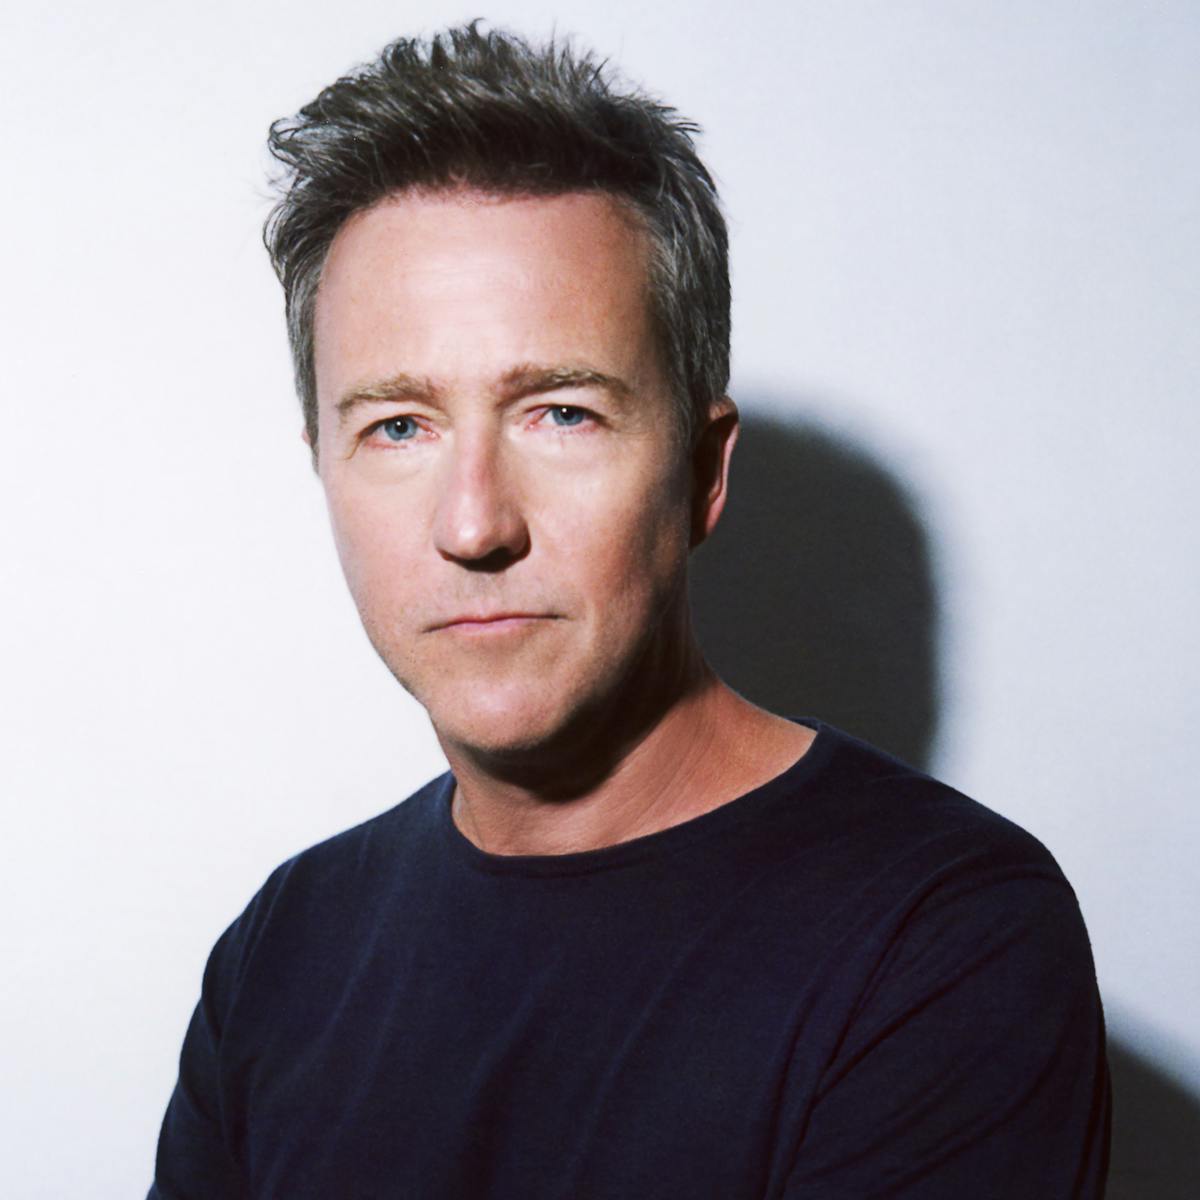 Edward Norton wears a dark shirt against a white background and smiles slightly.